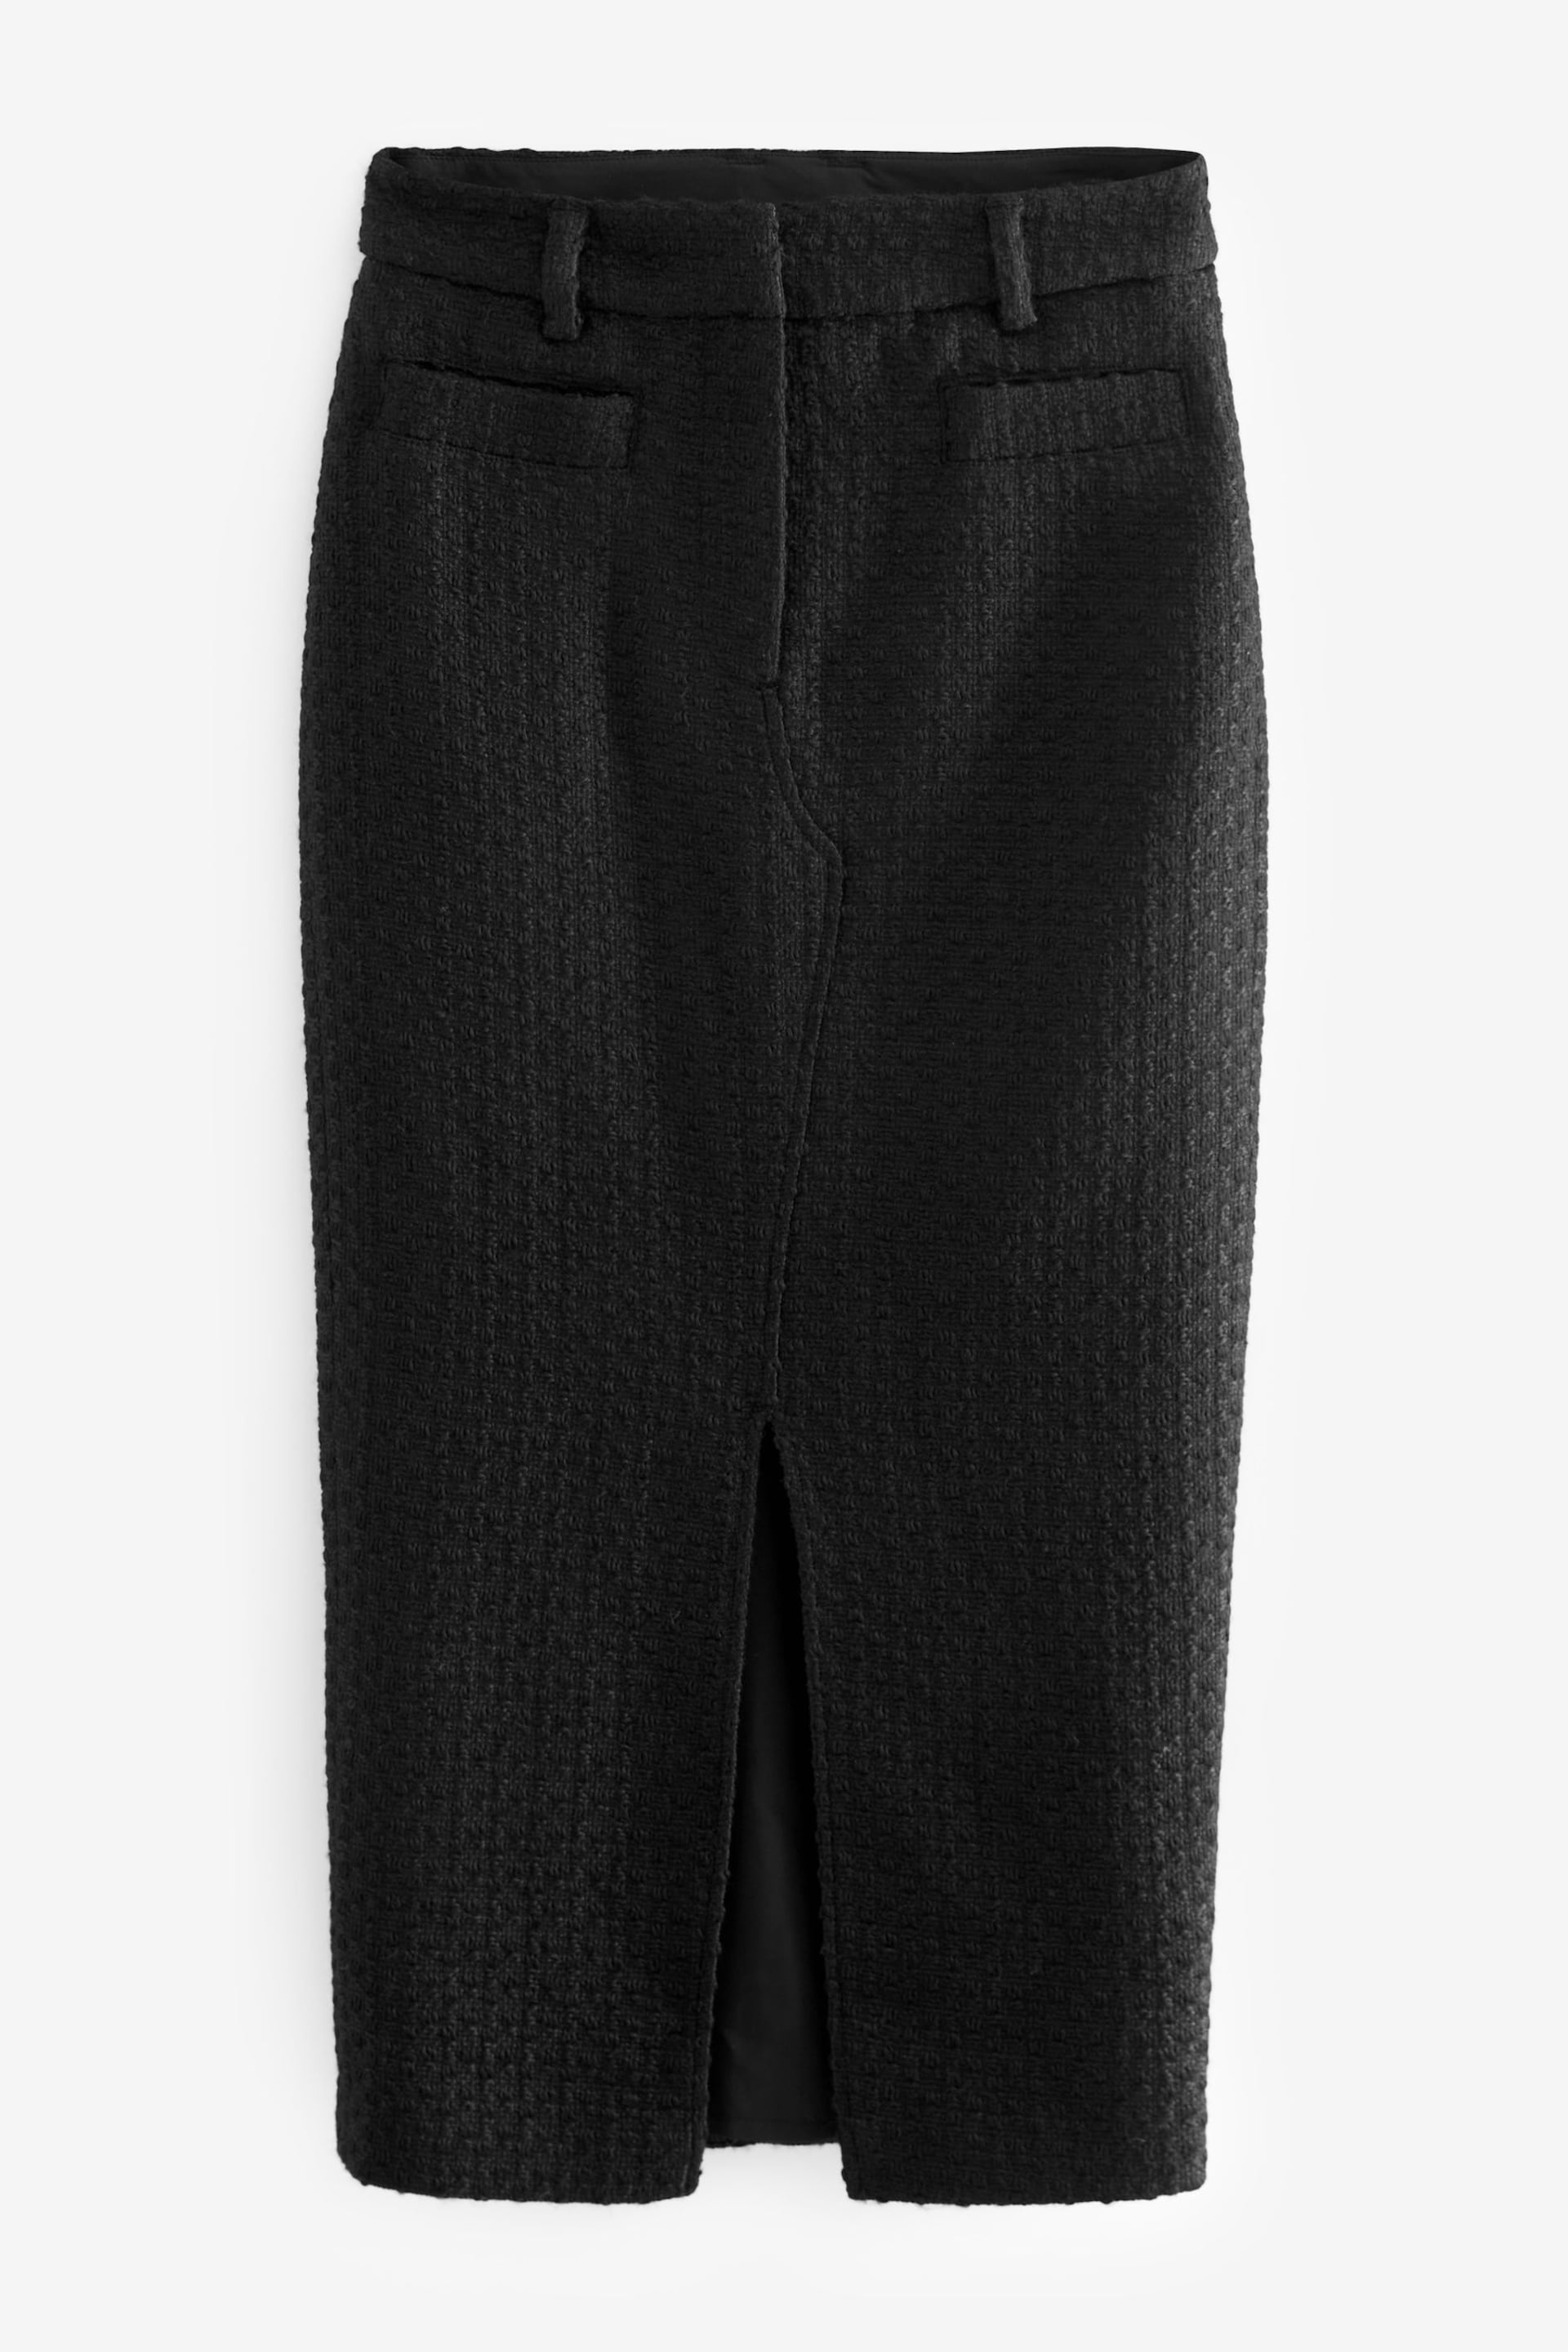 Black Rochelle Humes Boucle Column Skirt - Image 5 of 6